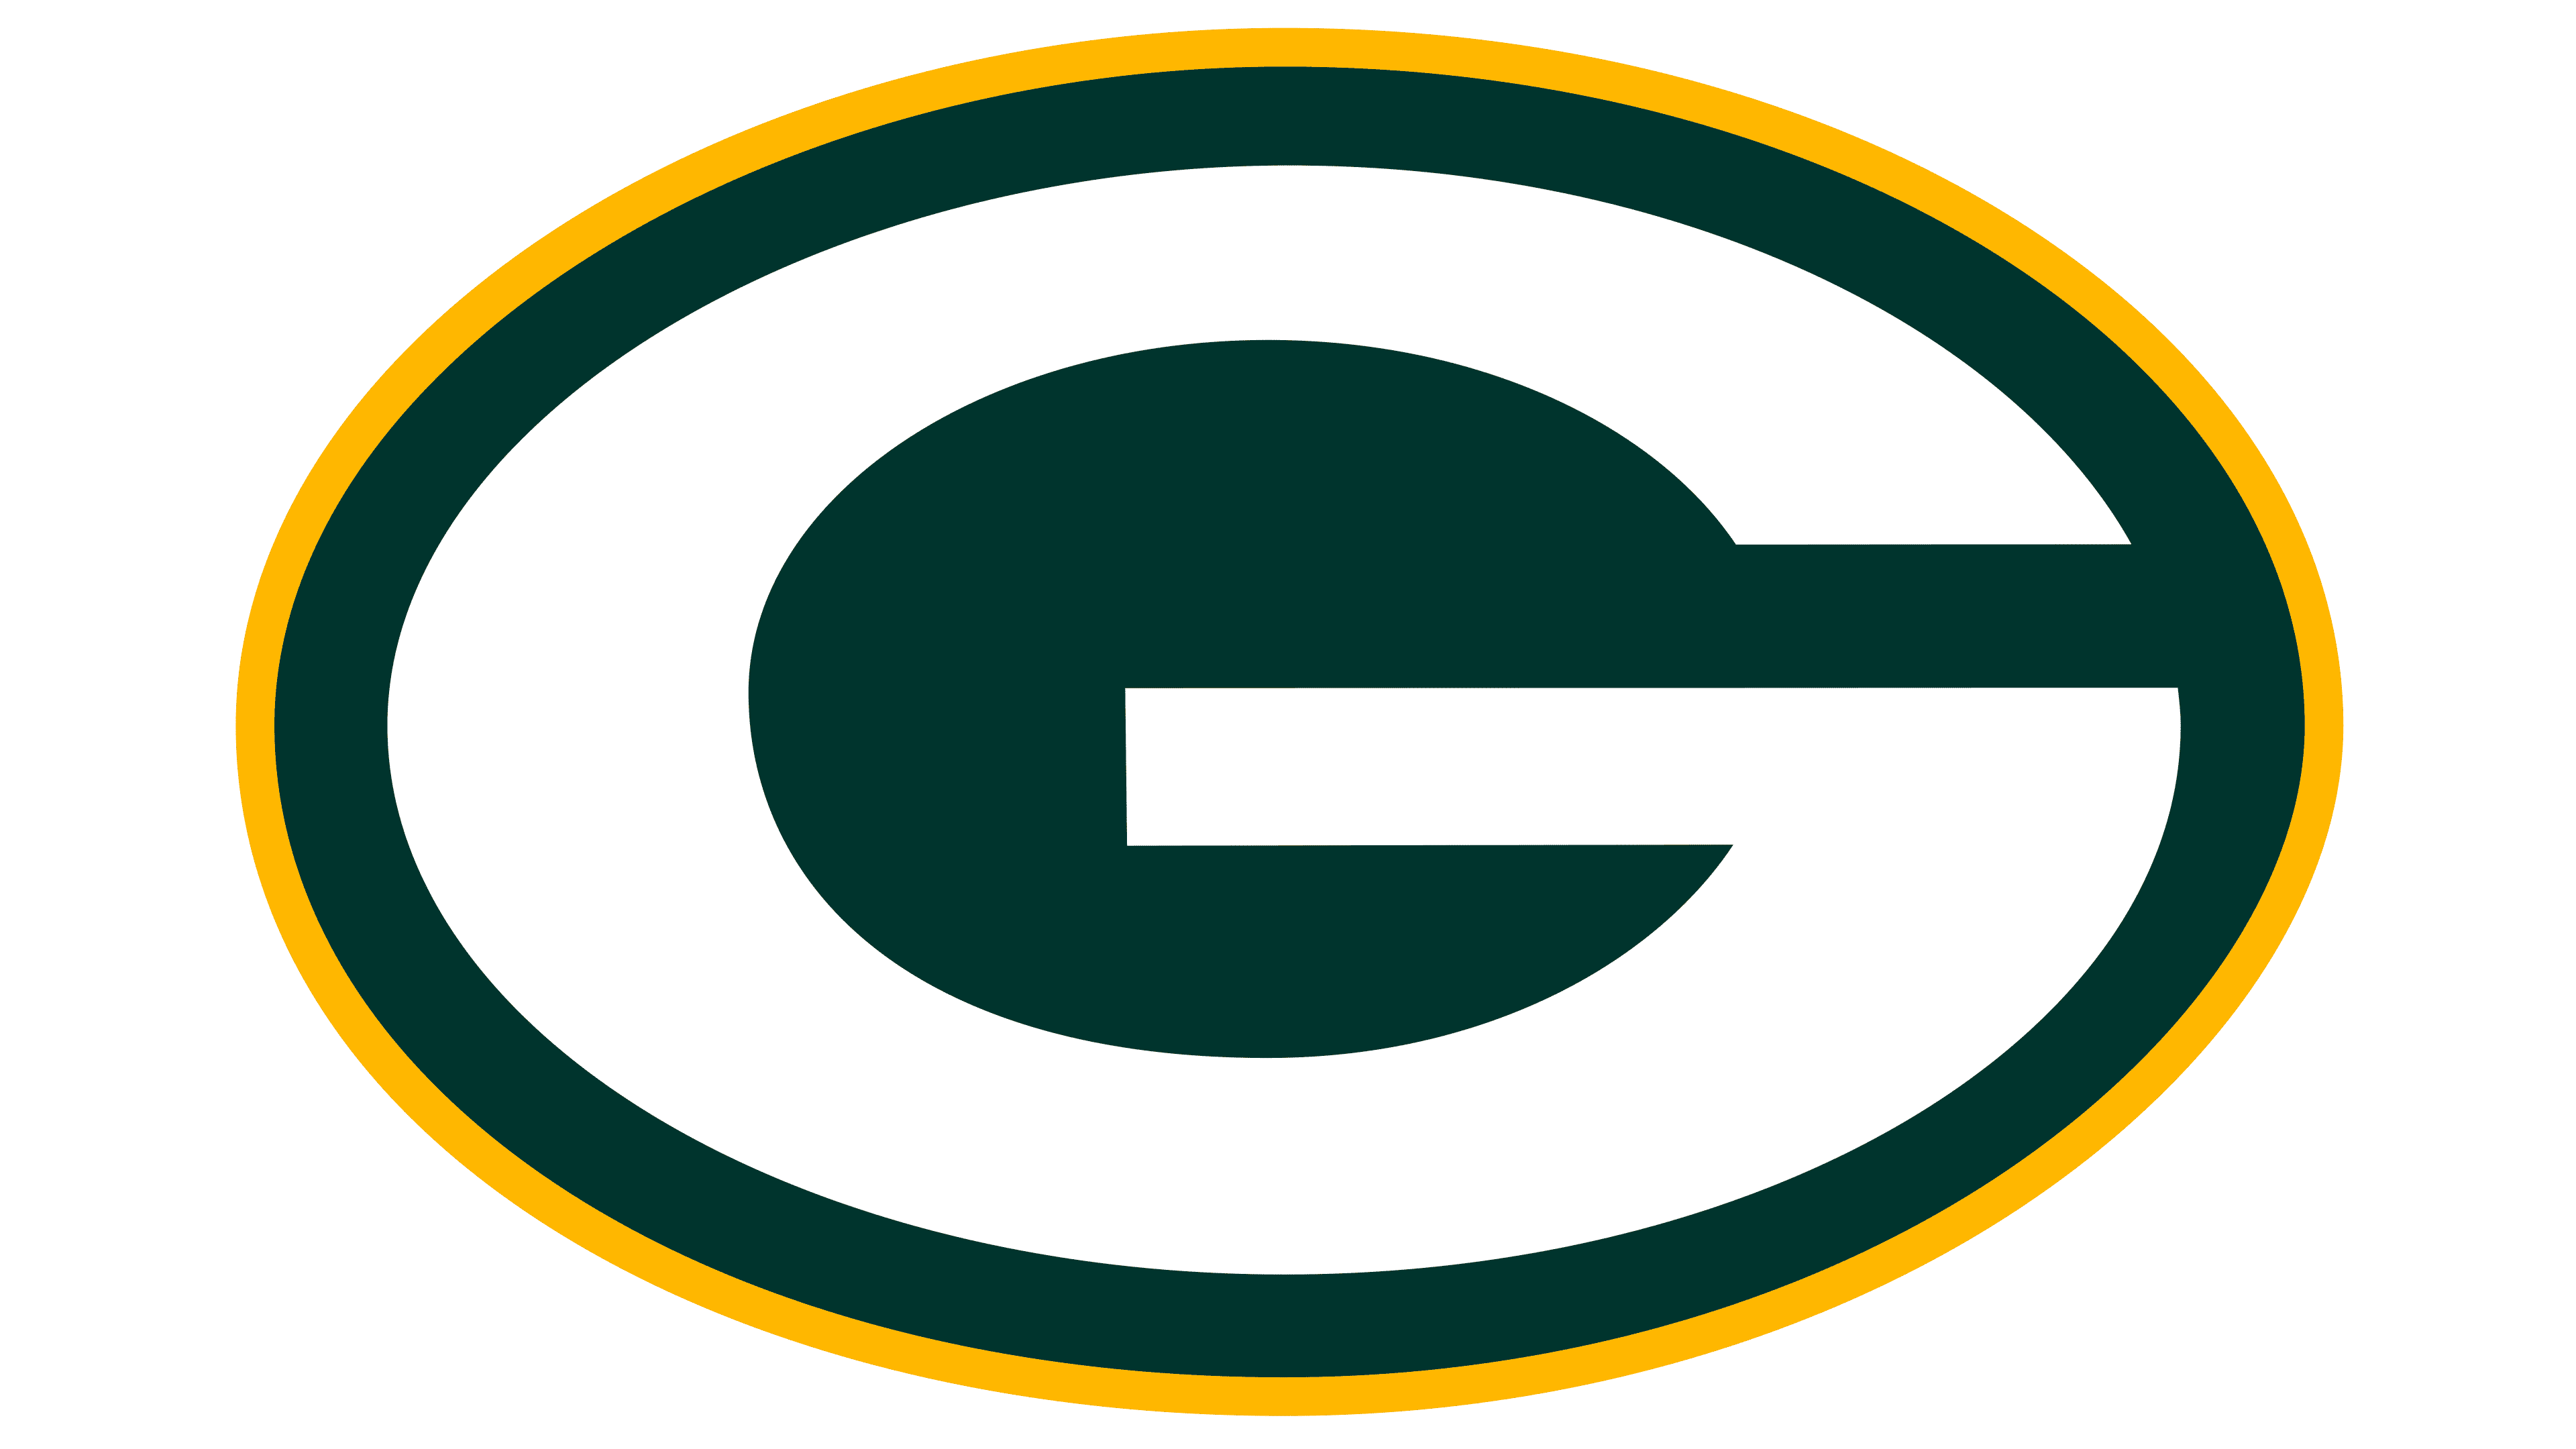 Green Bay Packers Logo | The most famous brands and company logos in